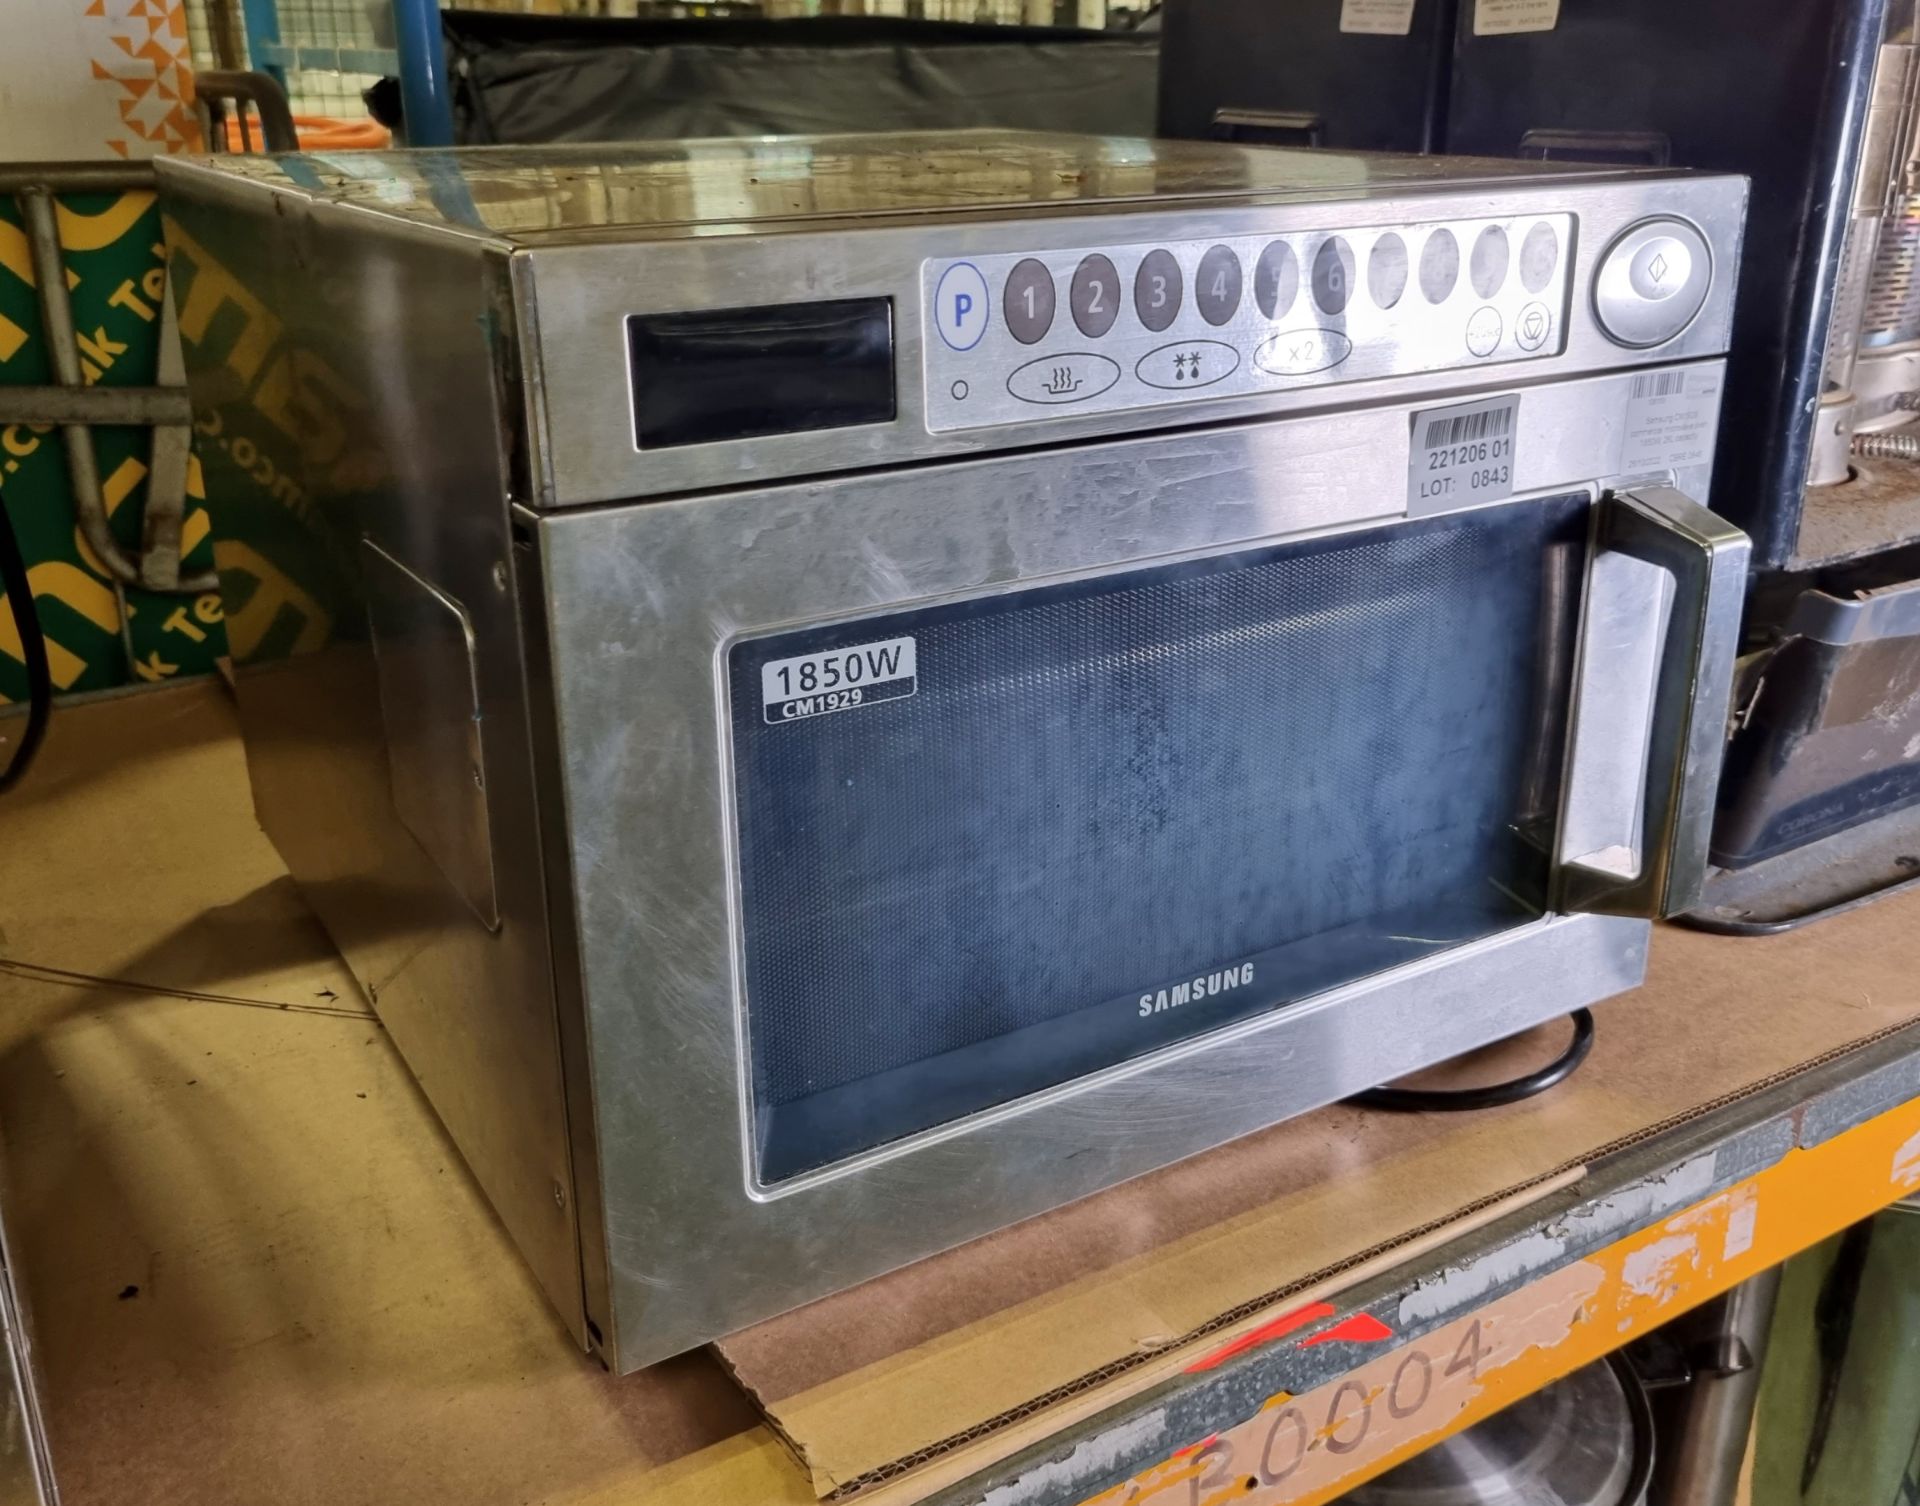 Samsung CM1929 commercial microwave oven, 1850W, 26L capacity - Image 2 of 4